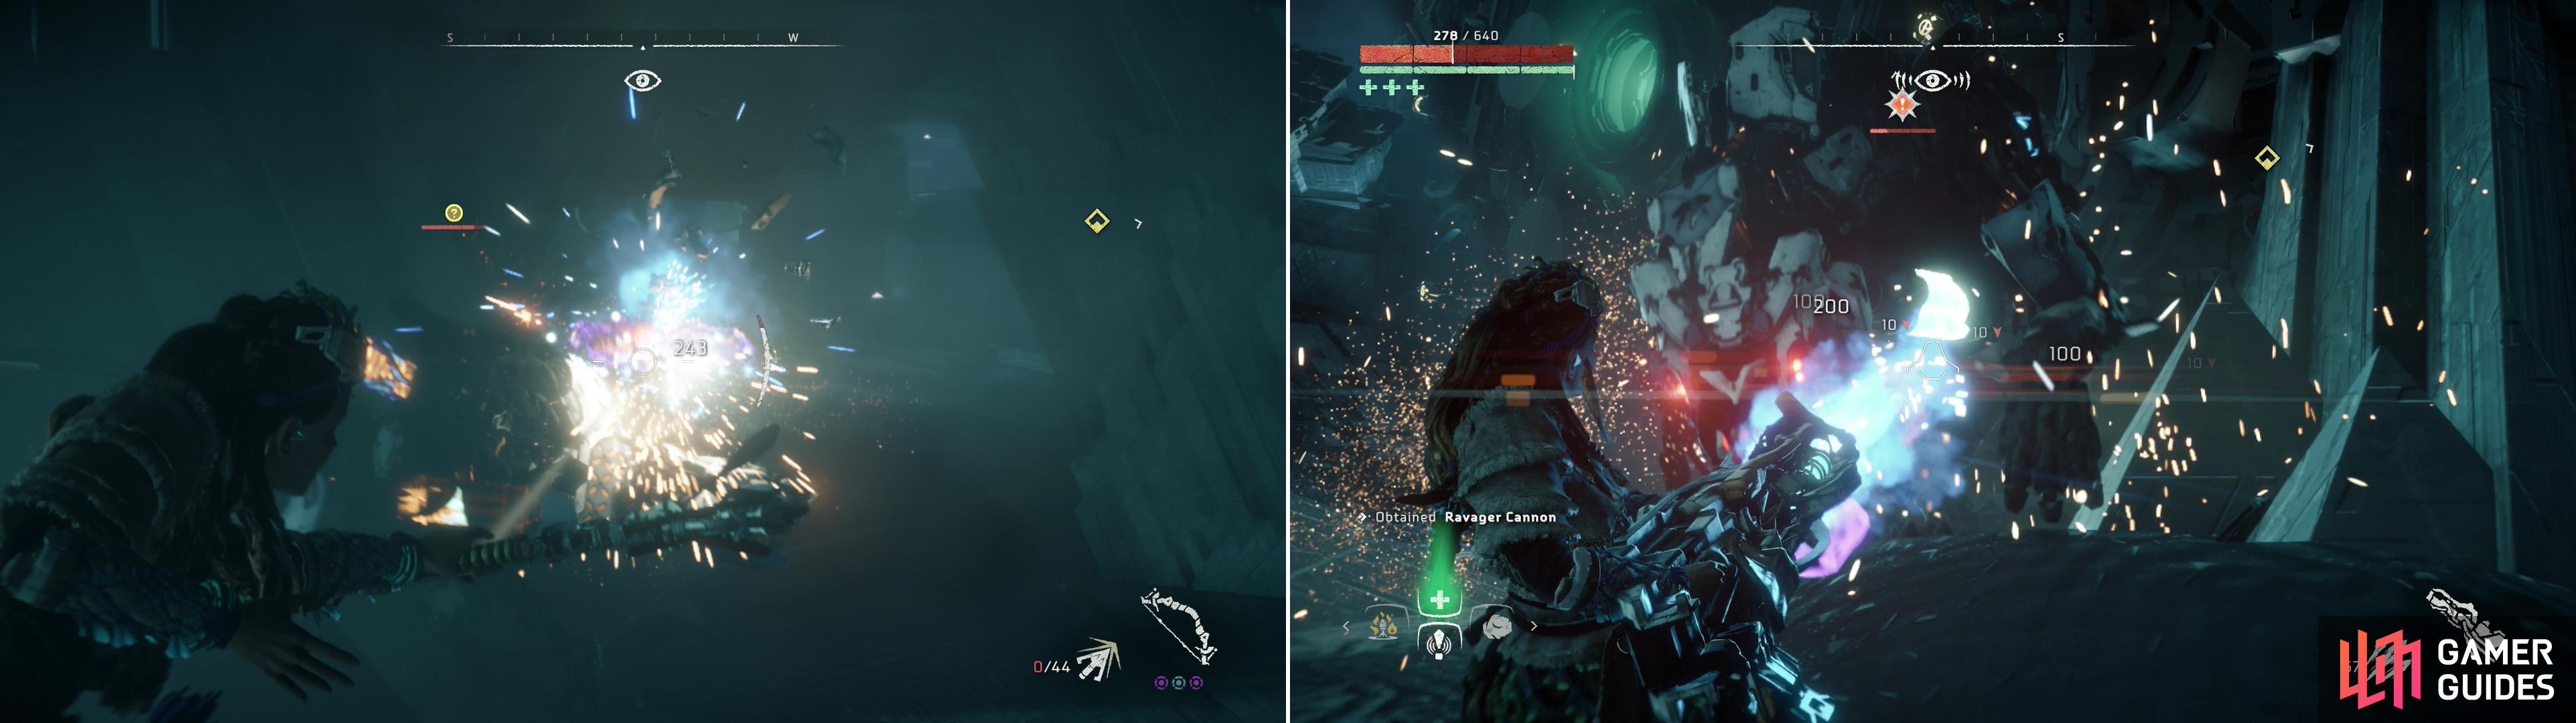 As usual, you shouldn’t view Ravagers as a threat (left) as much as an opportunity to grab a Ravager Cannon (right).